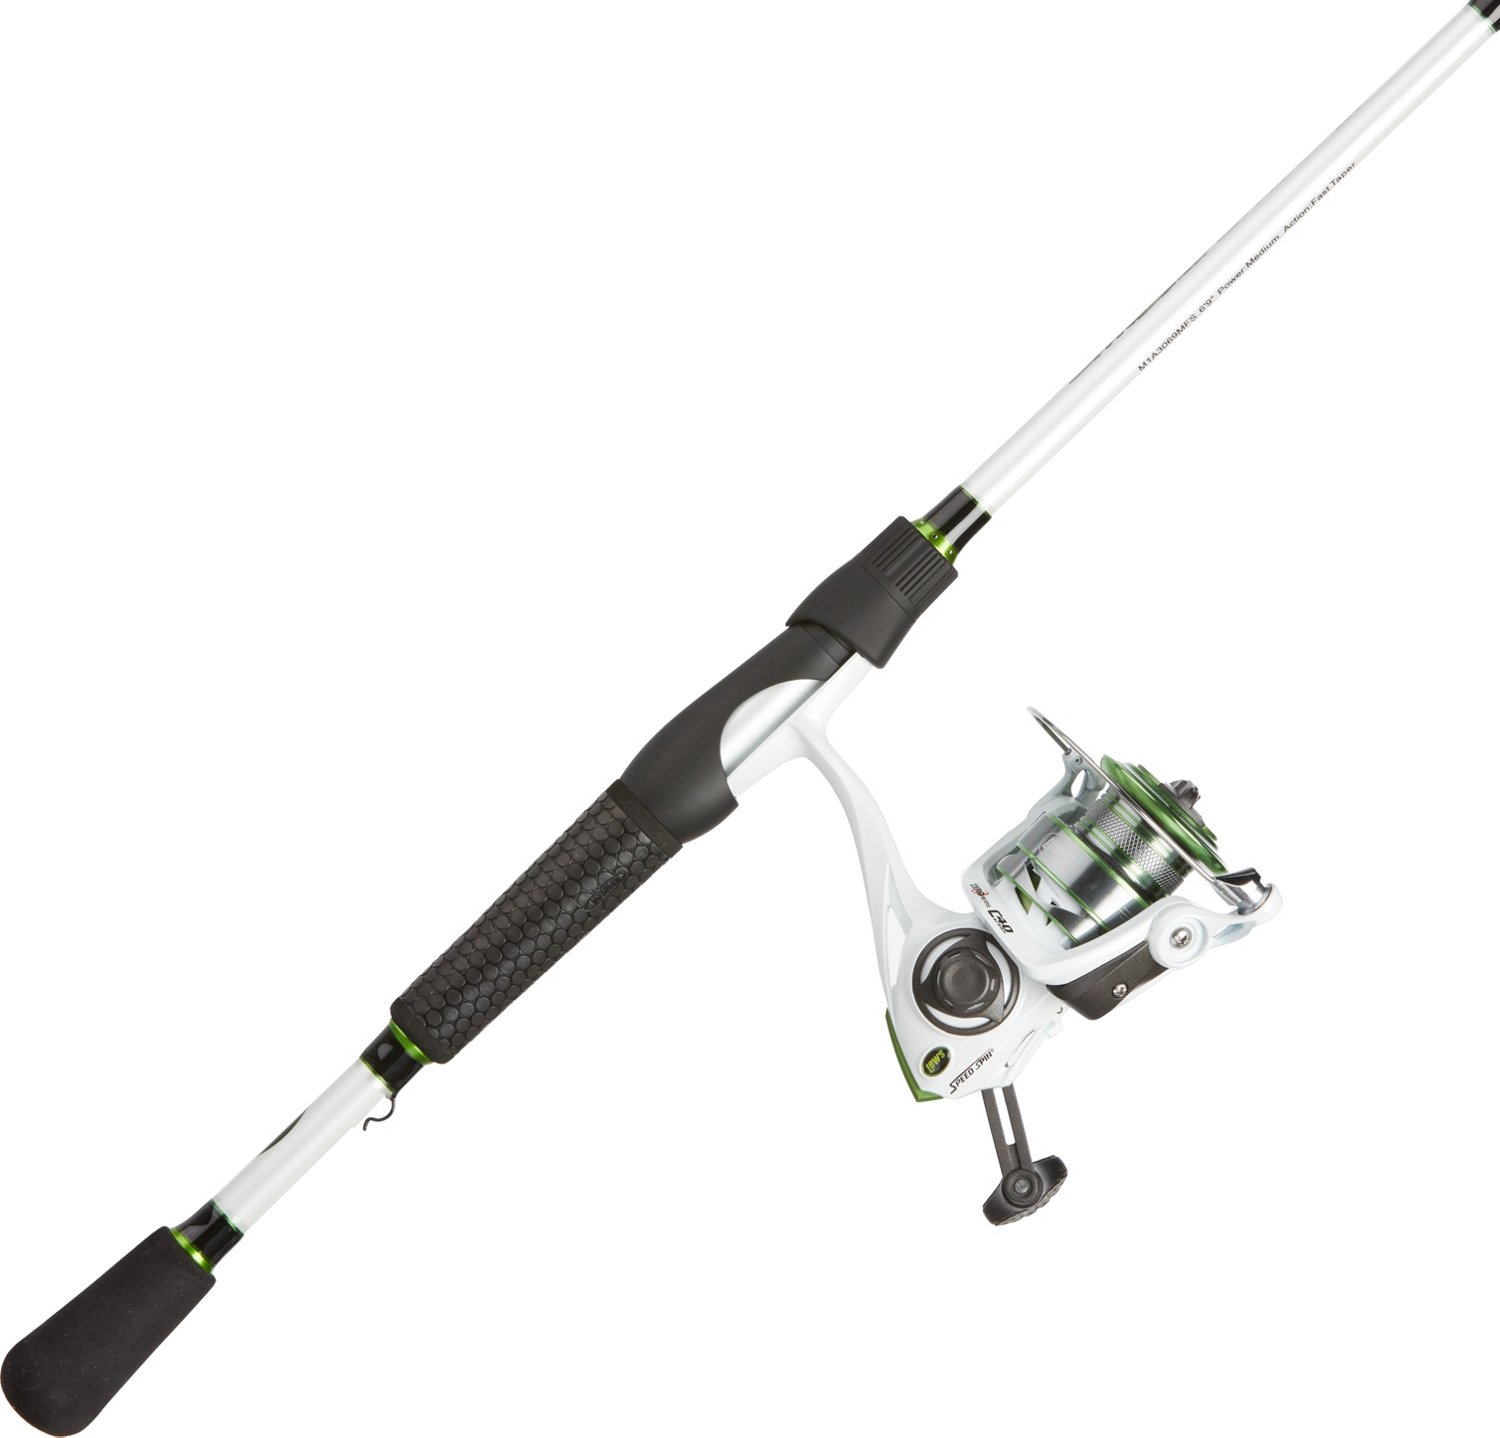  Fishing Rod & Reel Combos - Right-Handed / Fishing Rod & Reel  Combos / Fishing E: Sports & Outdoors